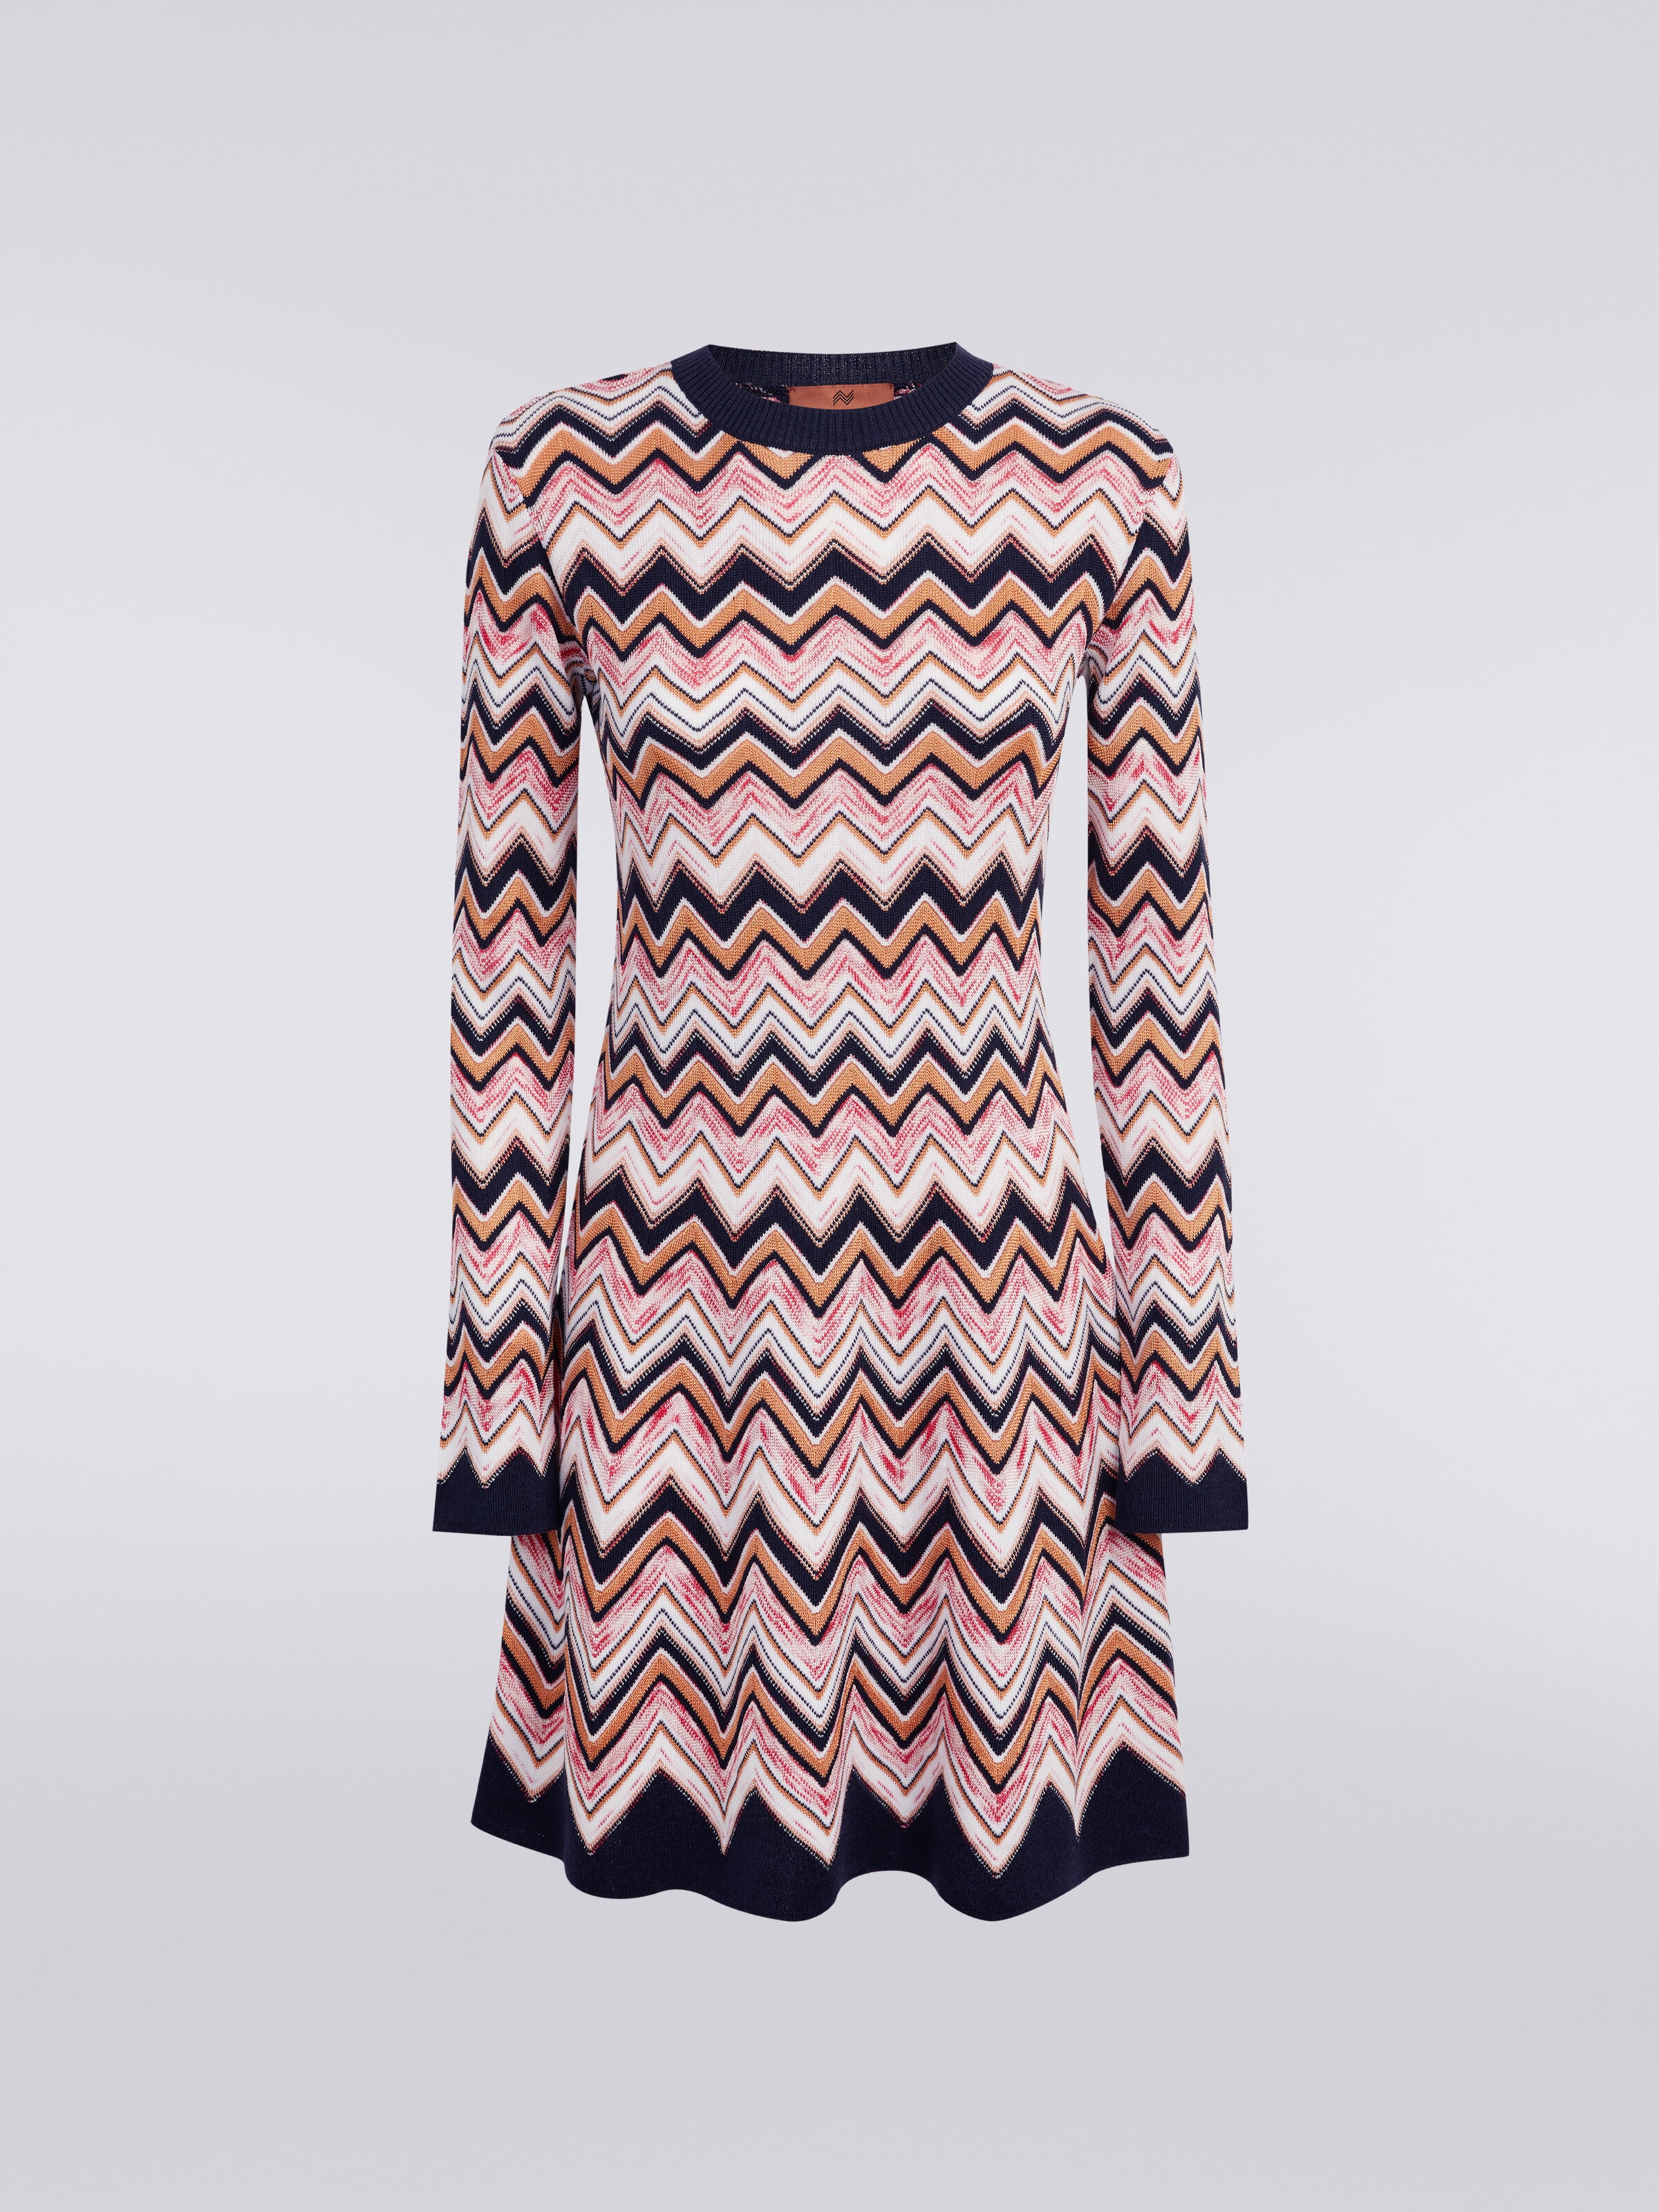 Long-sleeved crew-neck dress in zigzag knit, Multicoloured  - 0